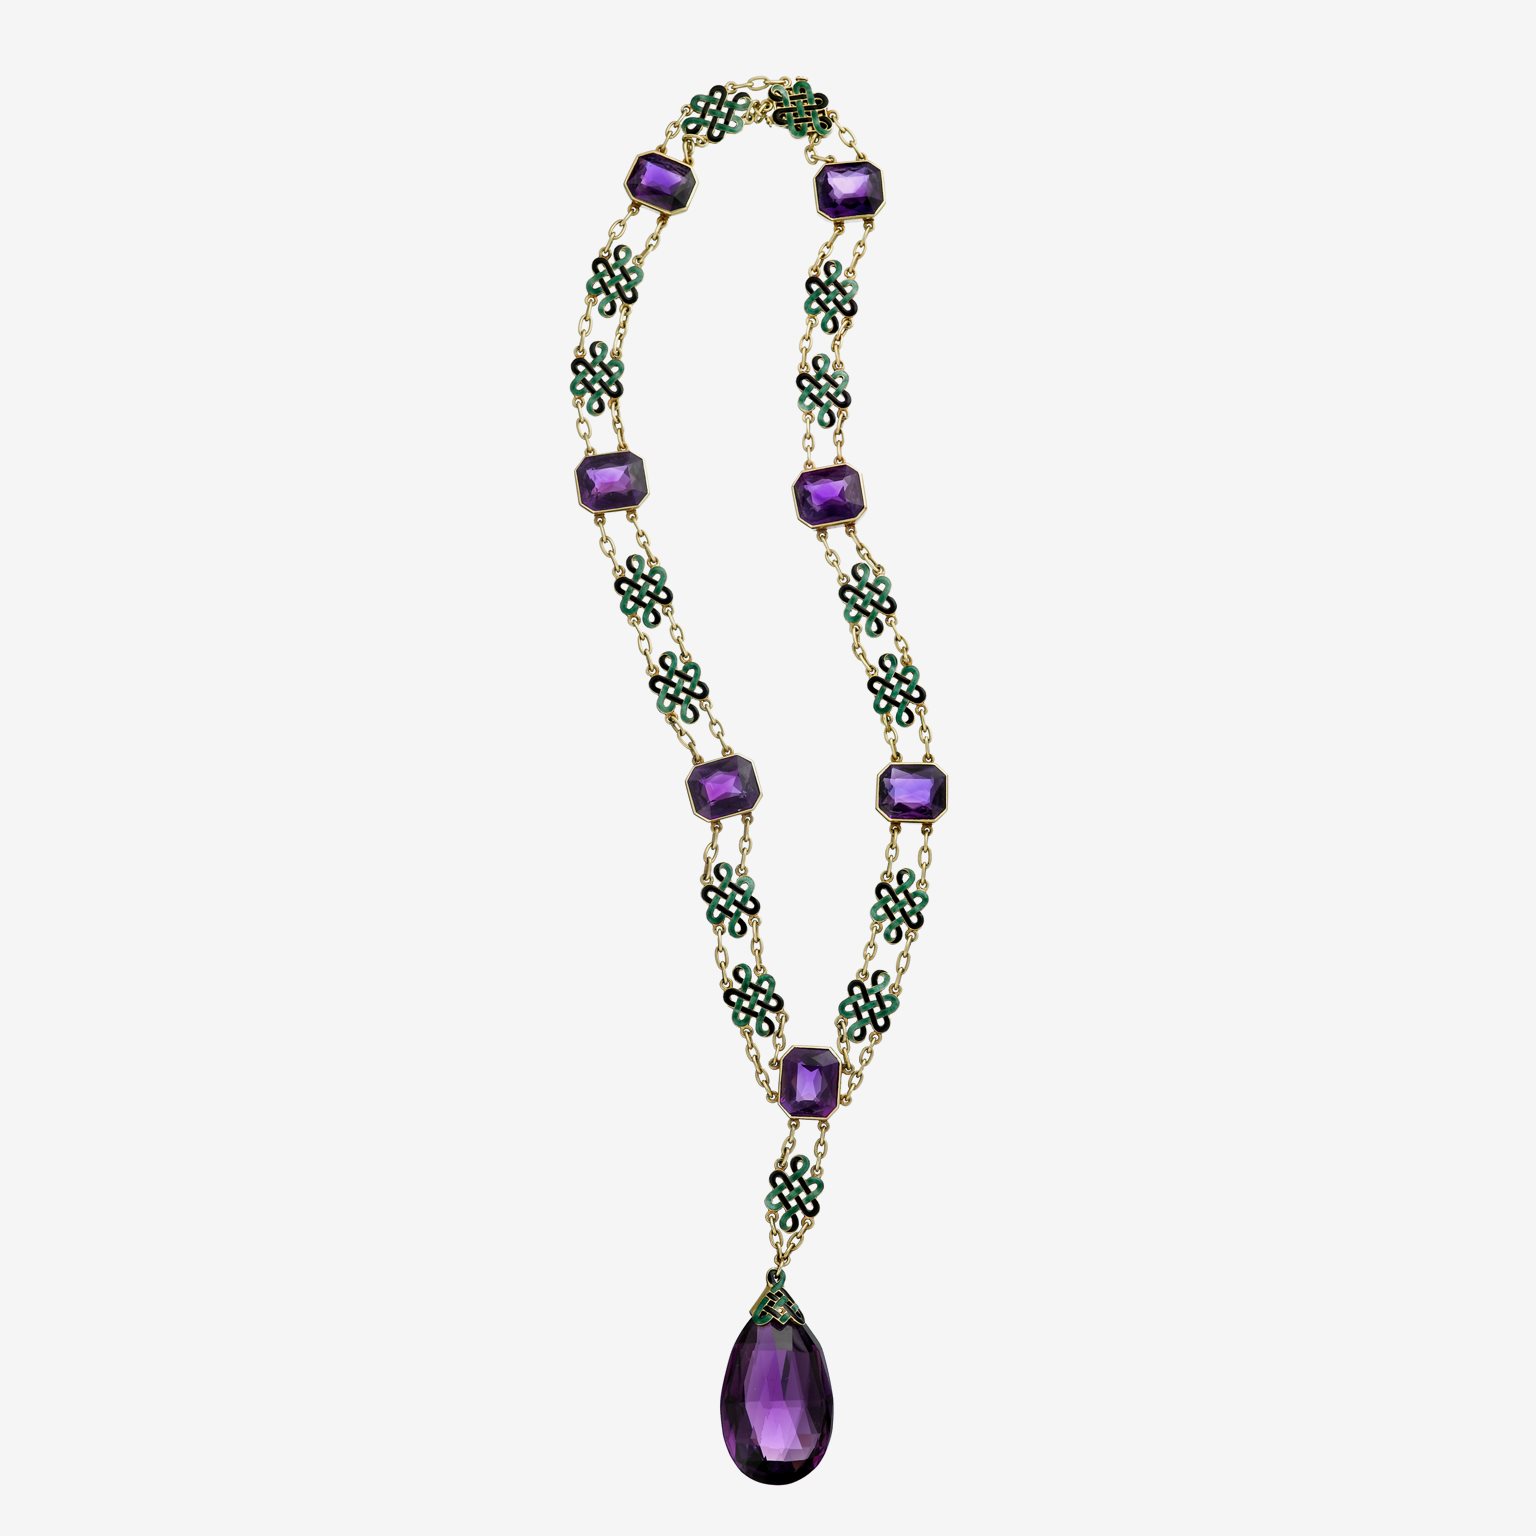 An Arts & Crafts amethyst, enamel and fourteen karat gold necklace set with rectangular-cut amethysts and a briolette-cut amethyst drop. Sold at Freeman's for $9,100